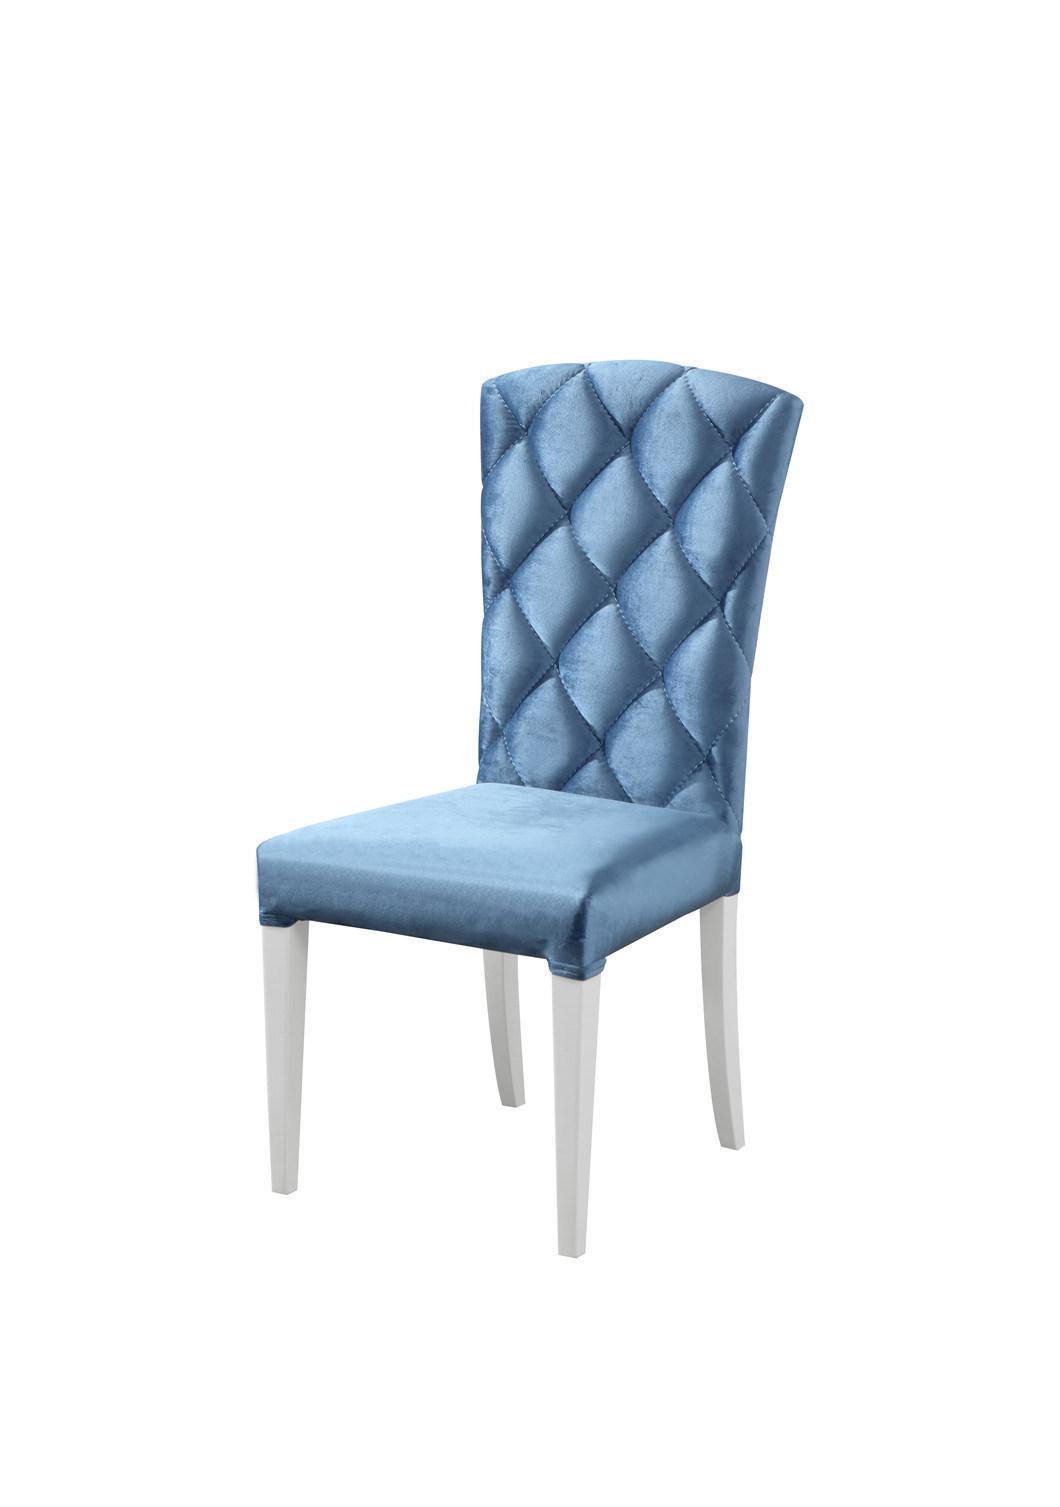 Modern Home Furniture Promotional Wooden Dining Room Chair with Fabric